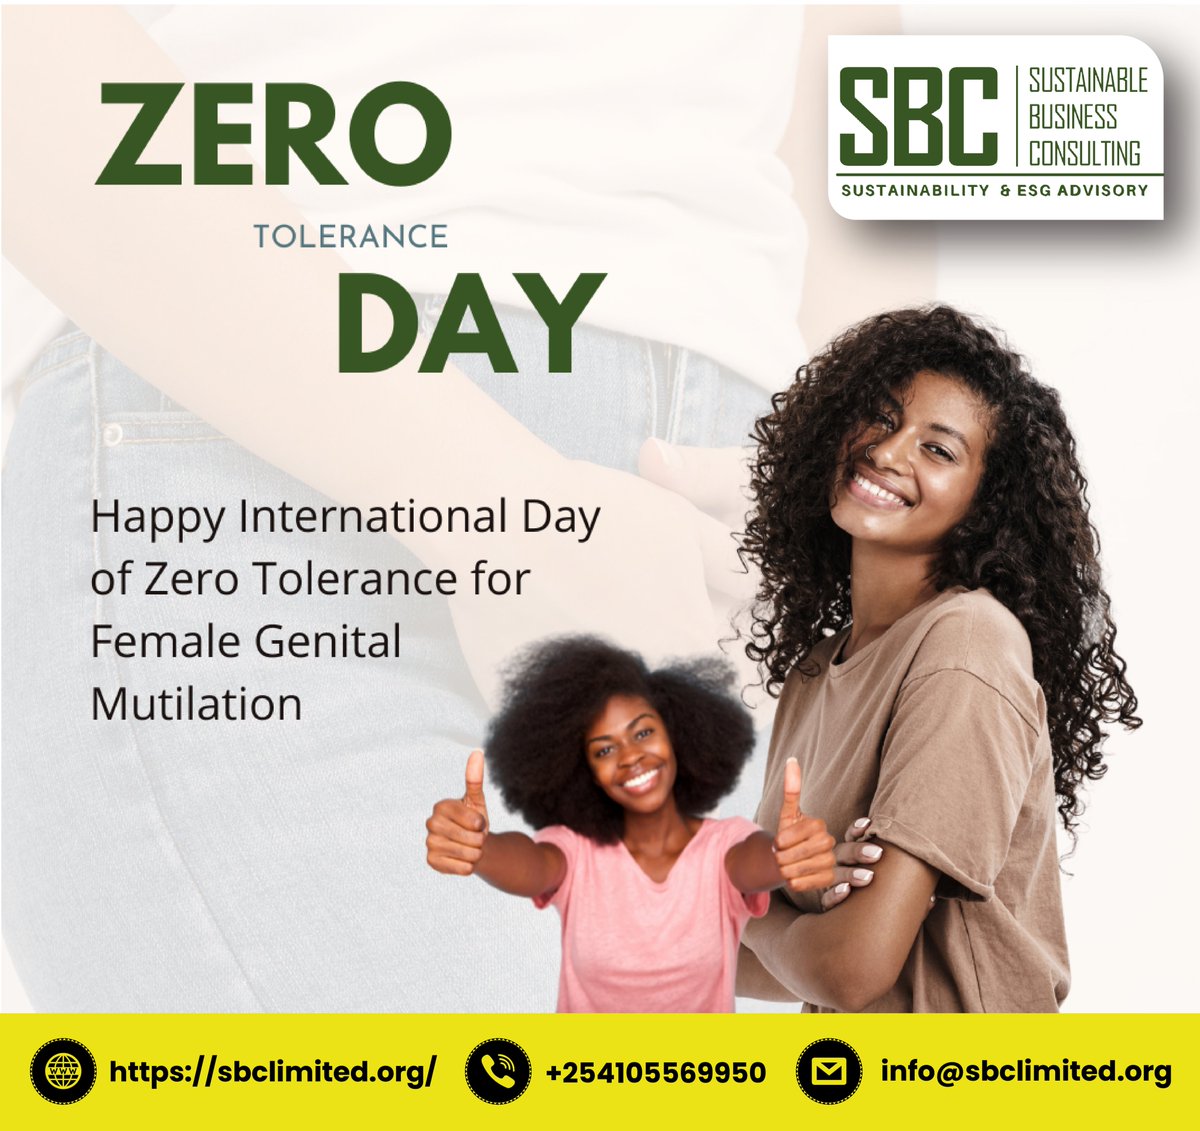 Happy International Day of Zero Tolerance for Female Genital Mutilation! Let's join hands to raise awareness, advocate for the rights of women and girls, and put an end to this harmful practice. #EndFGM #ZeroToleranceFGM #EmpowerWomen #ProtectGirls #HumanRights